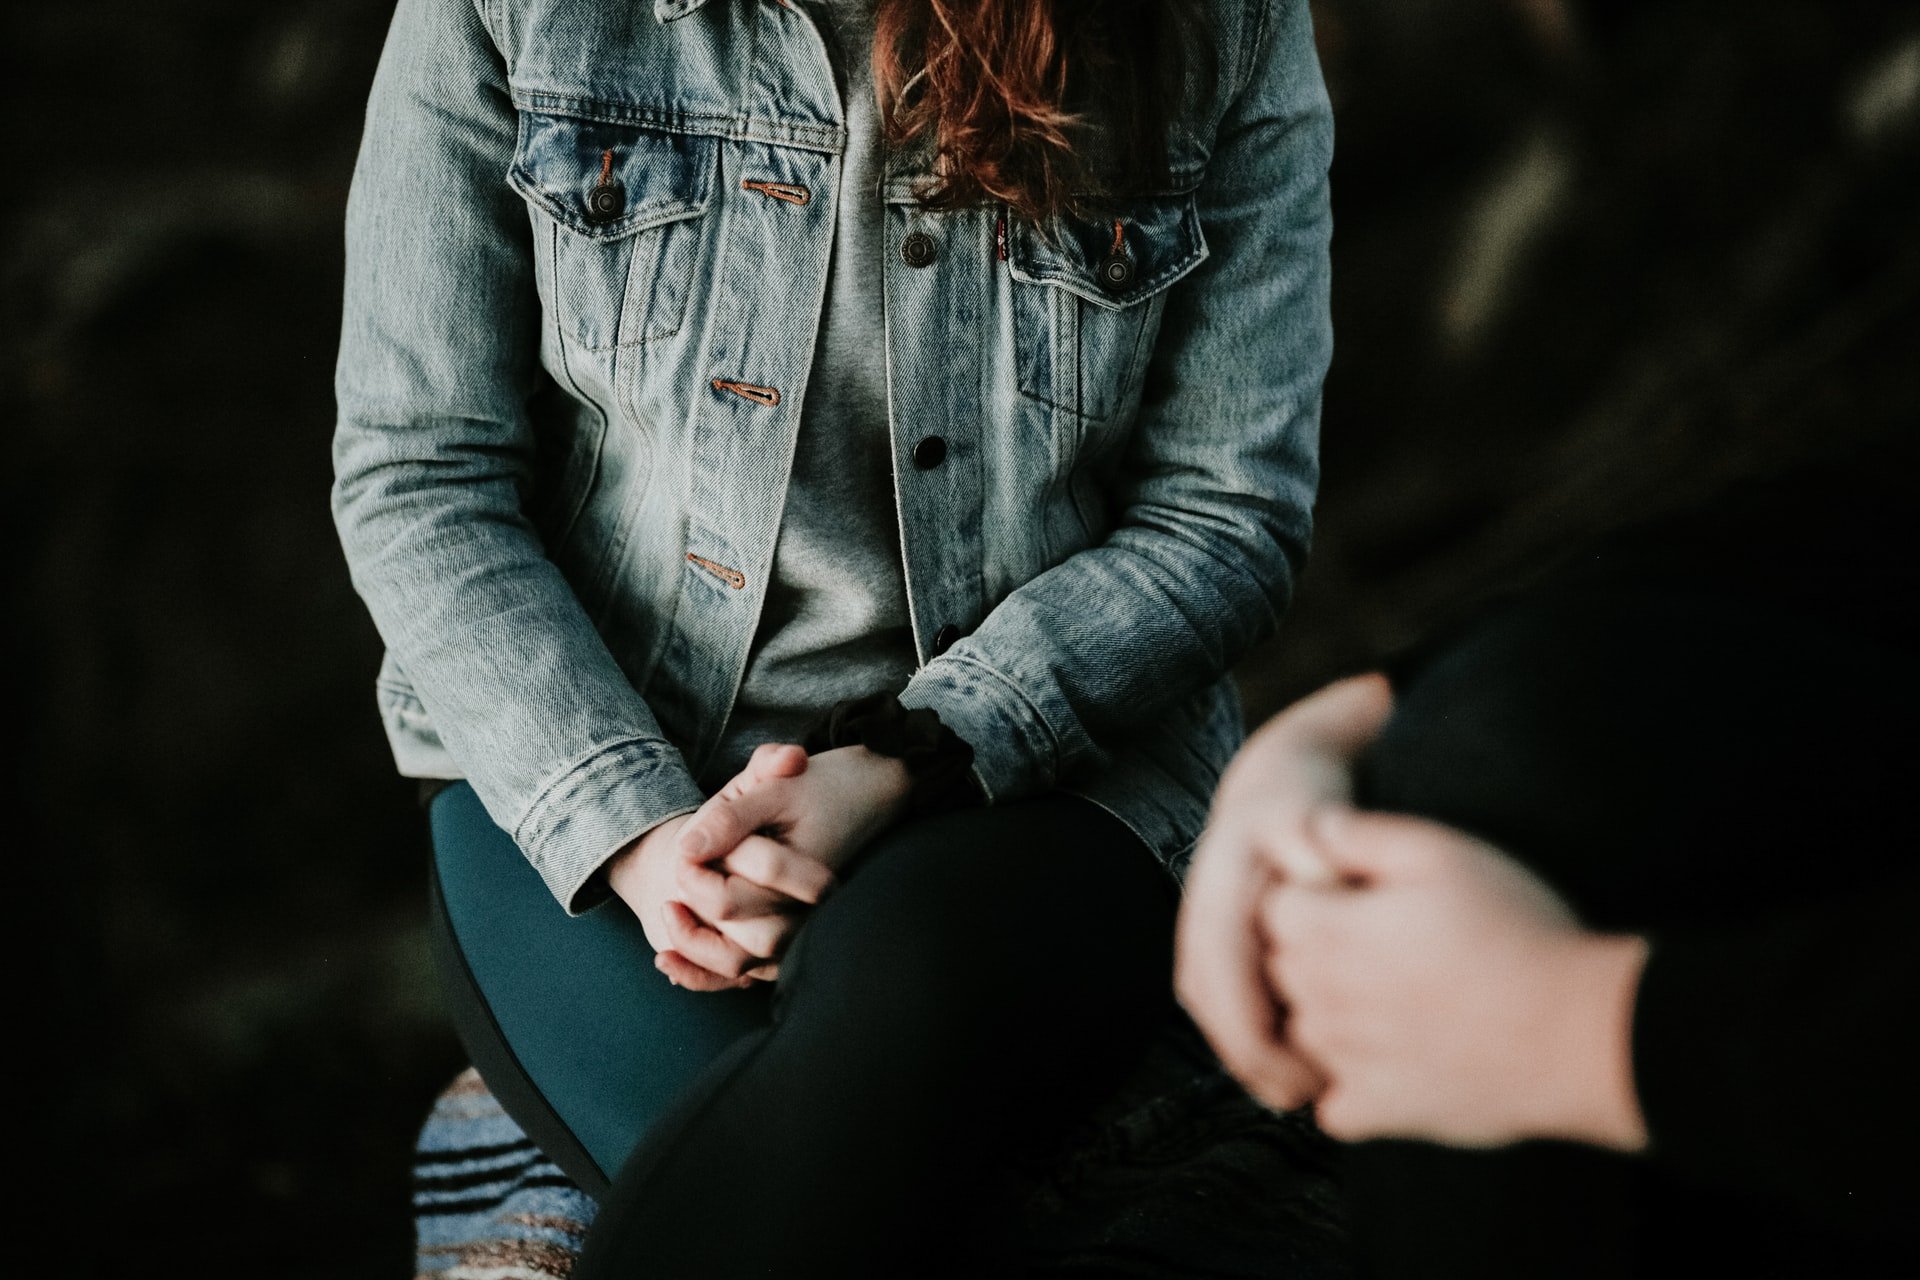 A Redditor asked OP to consult a therapist because she faced a massive betrayal. | Source: Unsplash